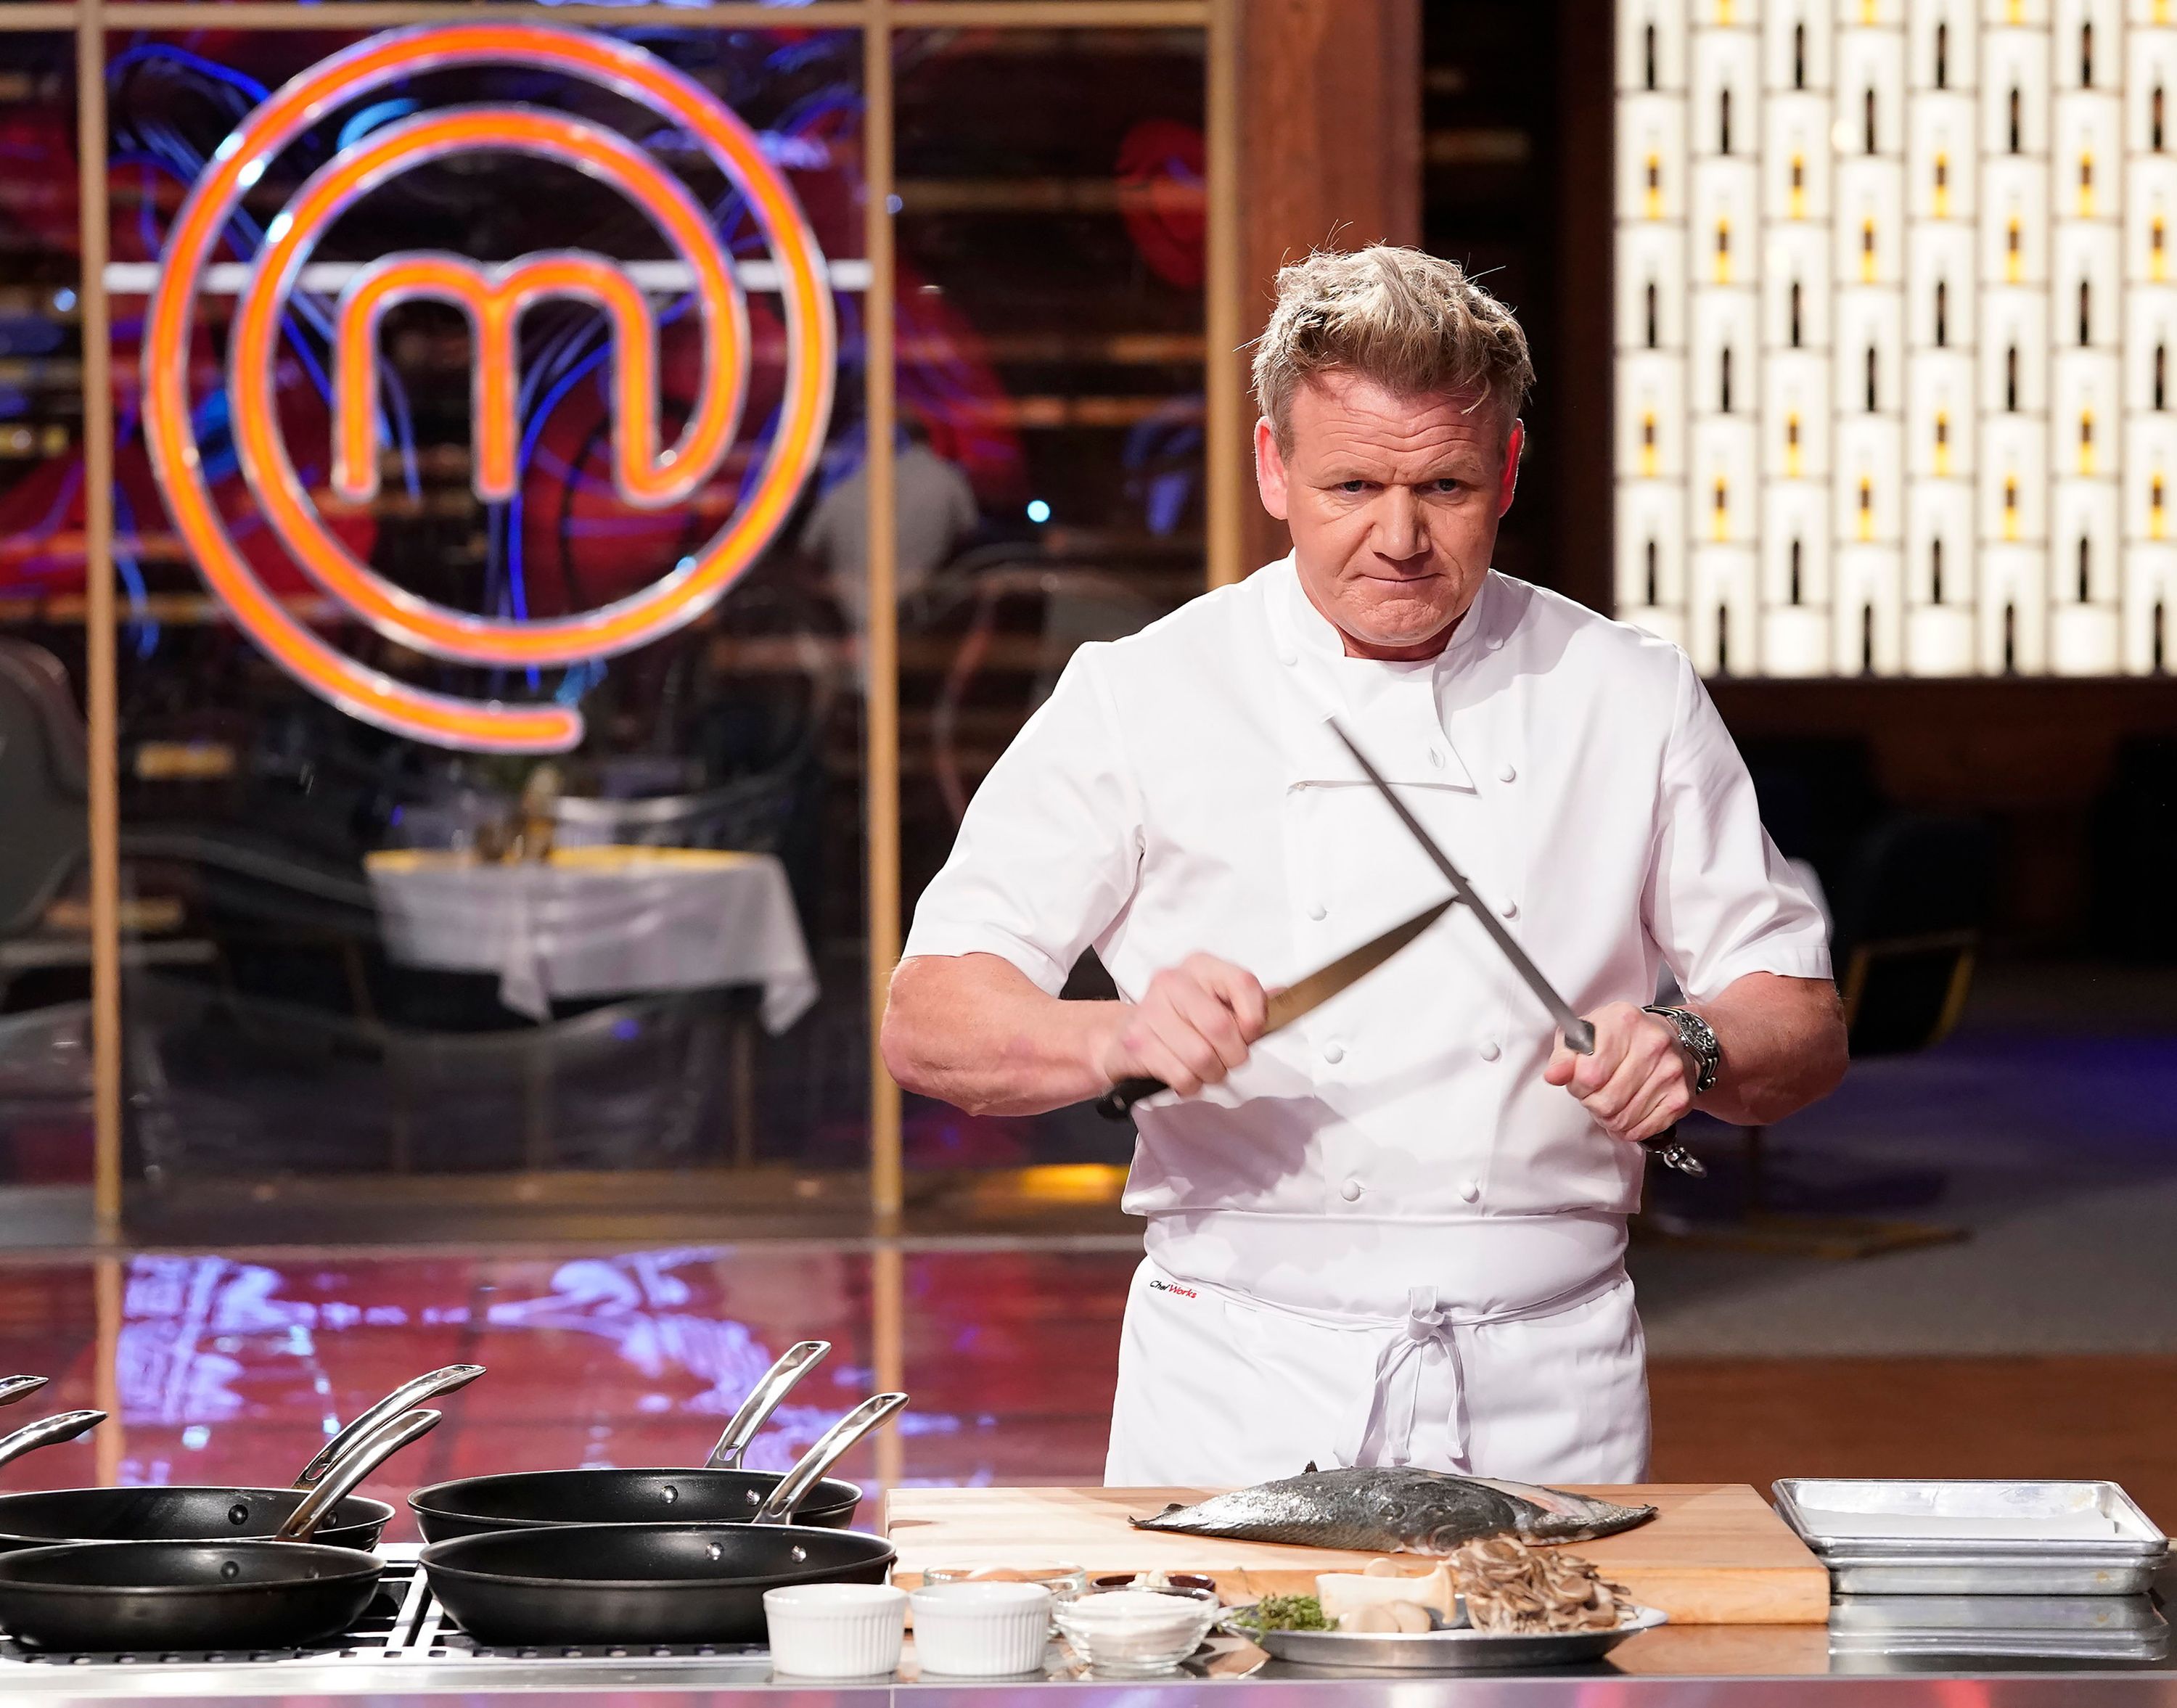 What Pans Does Gordon Ramsay Use? All Tools in Your Kitchen